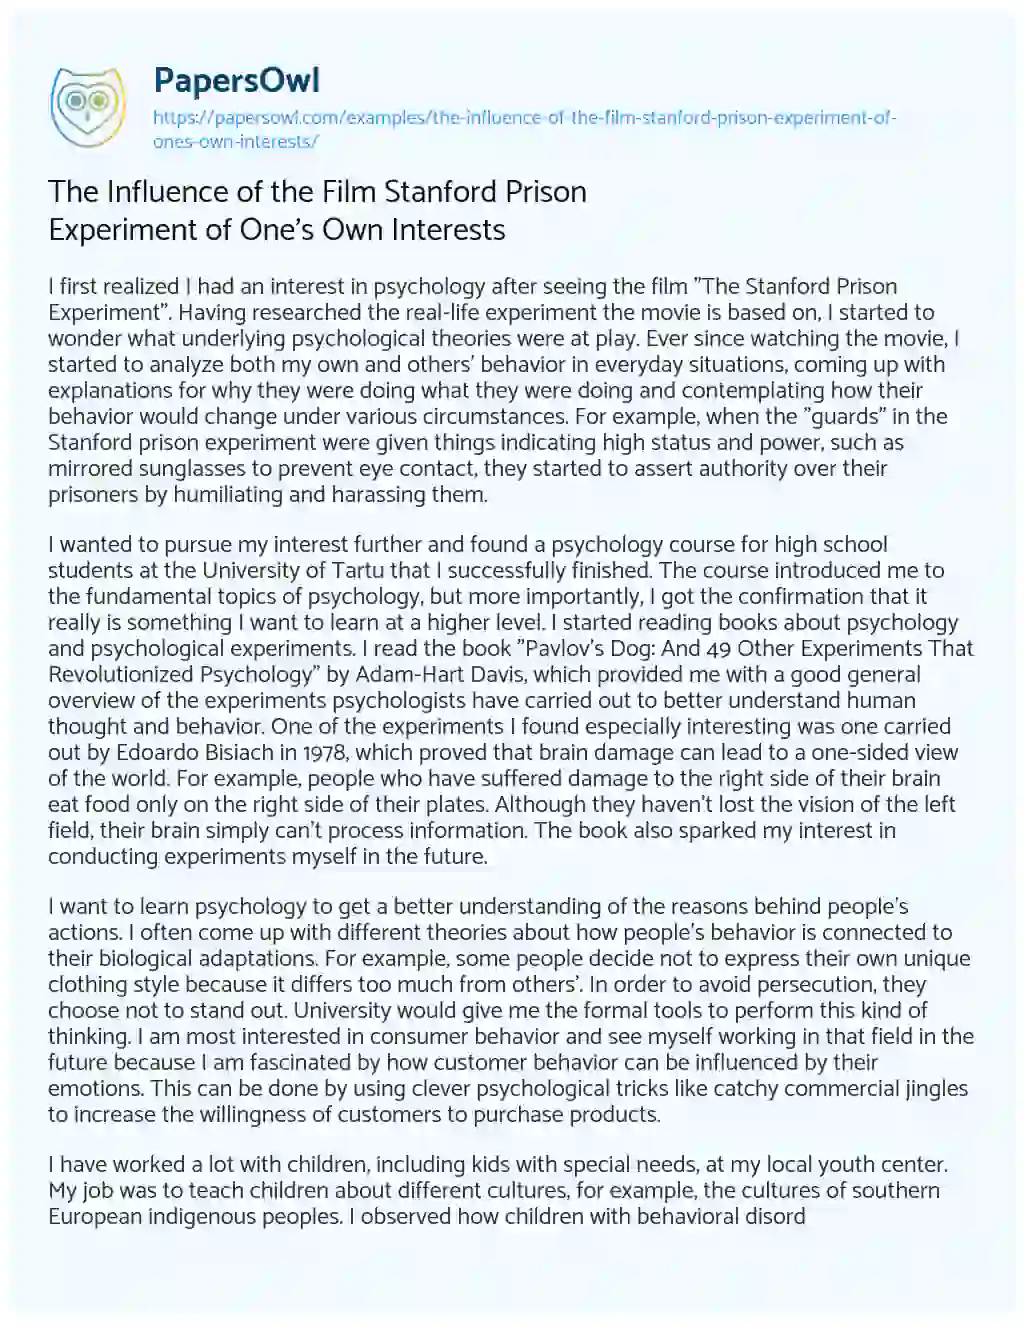 Essay on The Influence of the Film Stanford Prison Experiment of One’s own Interests